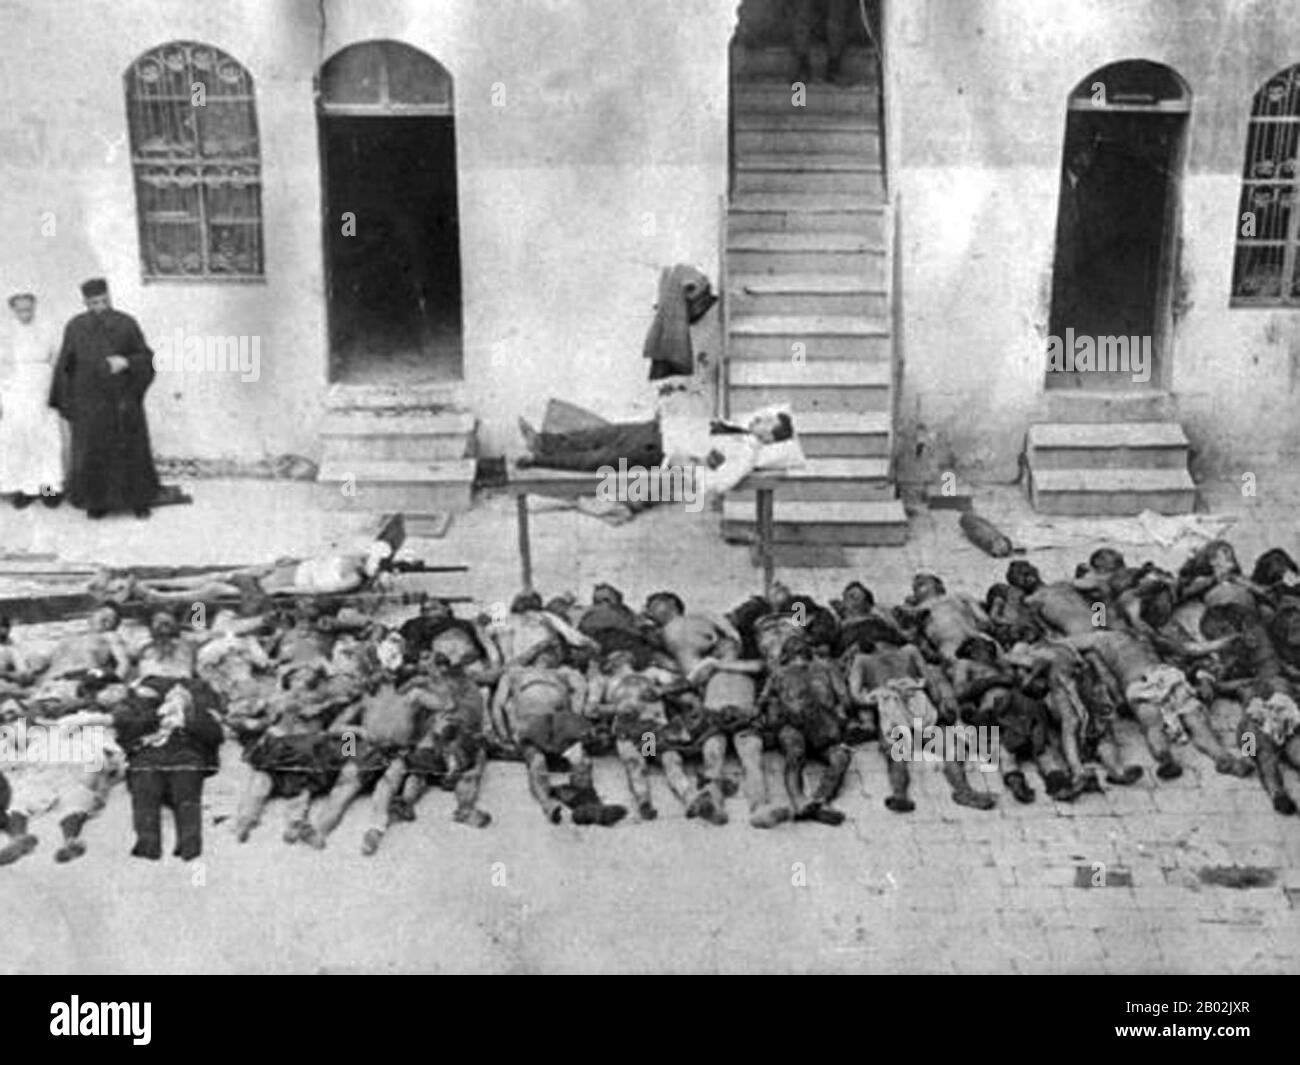 Syria / Turkey / Armenia: The corpses of Armenian victims of the genocide laid out in a courtyard, Aleppo, 1919. The Armenian Genocide refers to the deliberate and systematic destruction of the Armenian population of the Ottoman Empire during and just after World War I. It was implemented through wholesale massacres and deportations, with the deportations consisting of forced marches under conditions designed to lead to the death of the deportees. The total number of resulting Armenian deaths is generally held to have been between one and one and a half million. Stock Photo